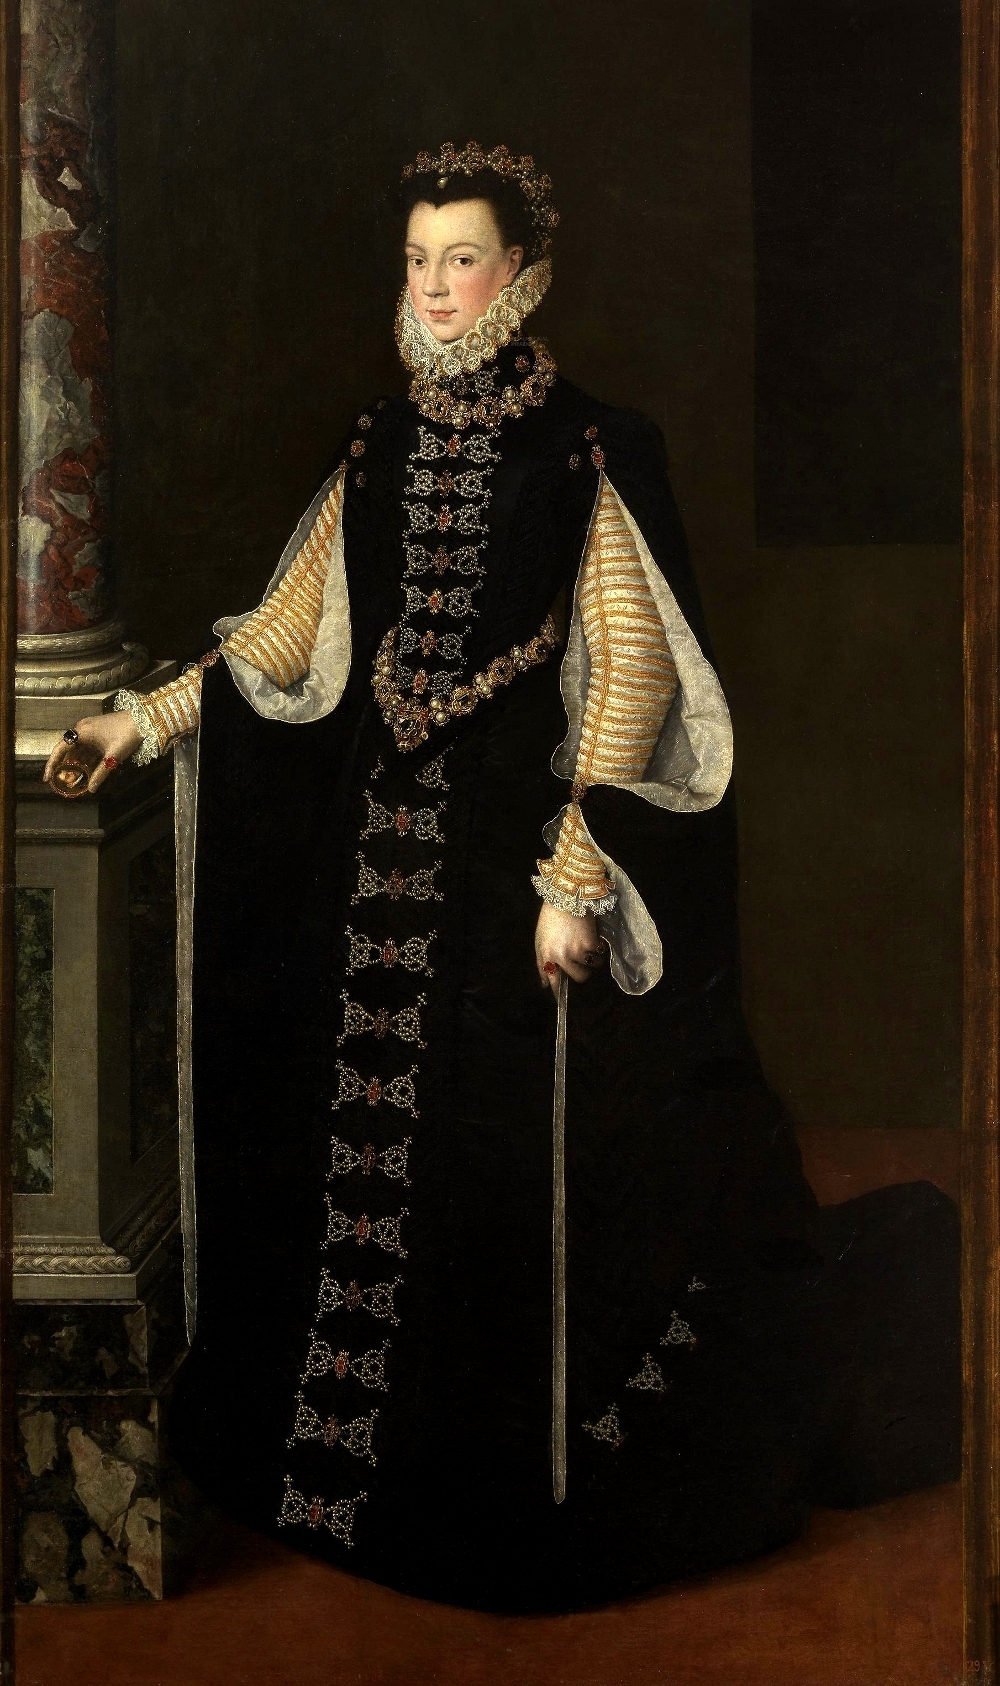 Sofonisba Anguissola, Portrait of Elizabeth of Valois Holding a Portrait of Philip II, 1561 - 1565. Oil on canvas. (Copy)